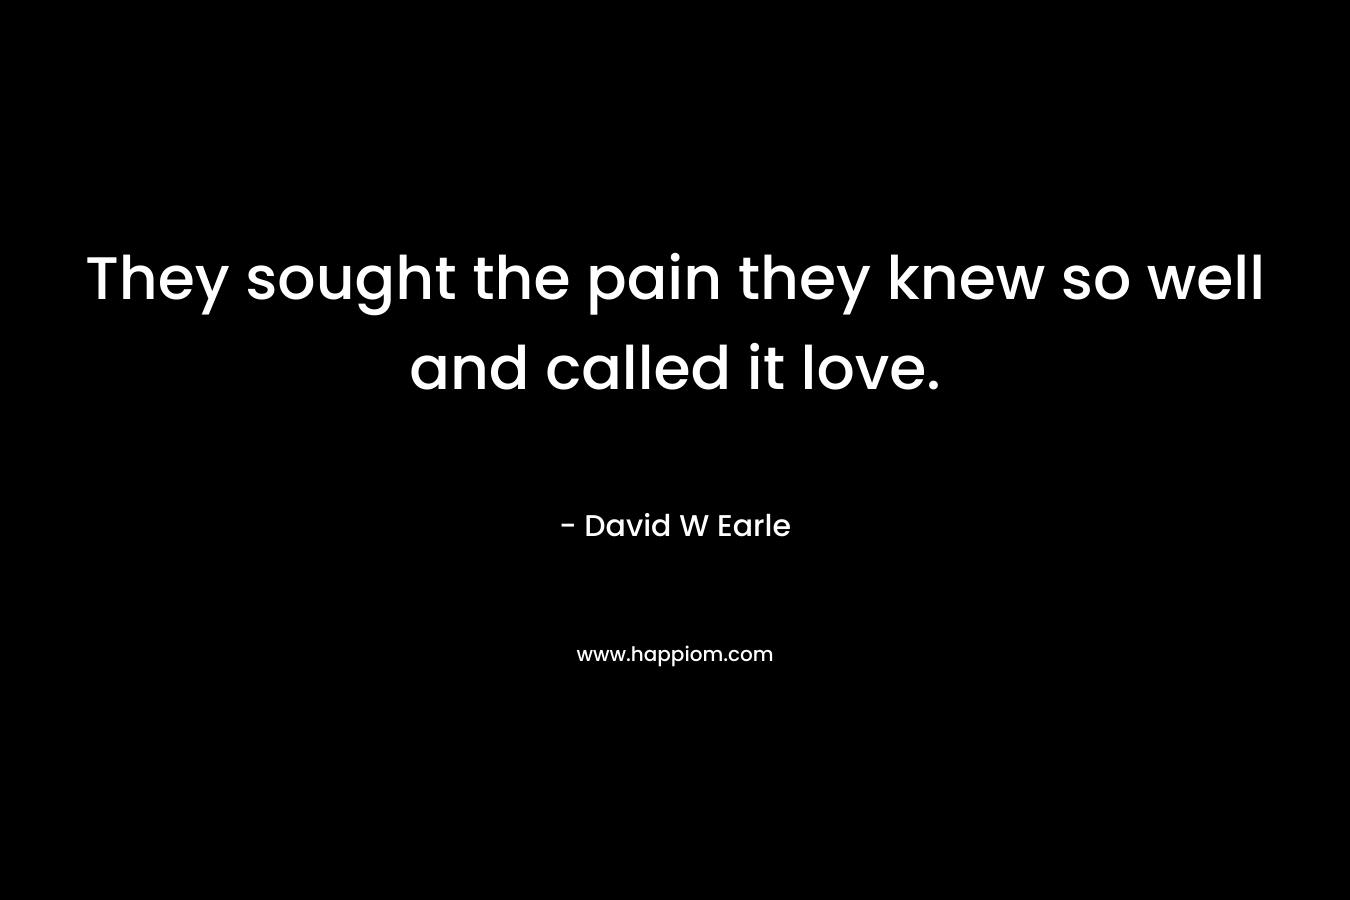 They sought the pain they knew so well and called it love. – David W Earle